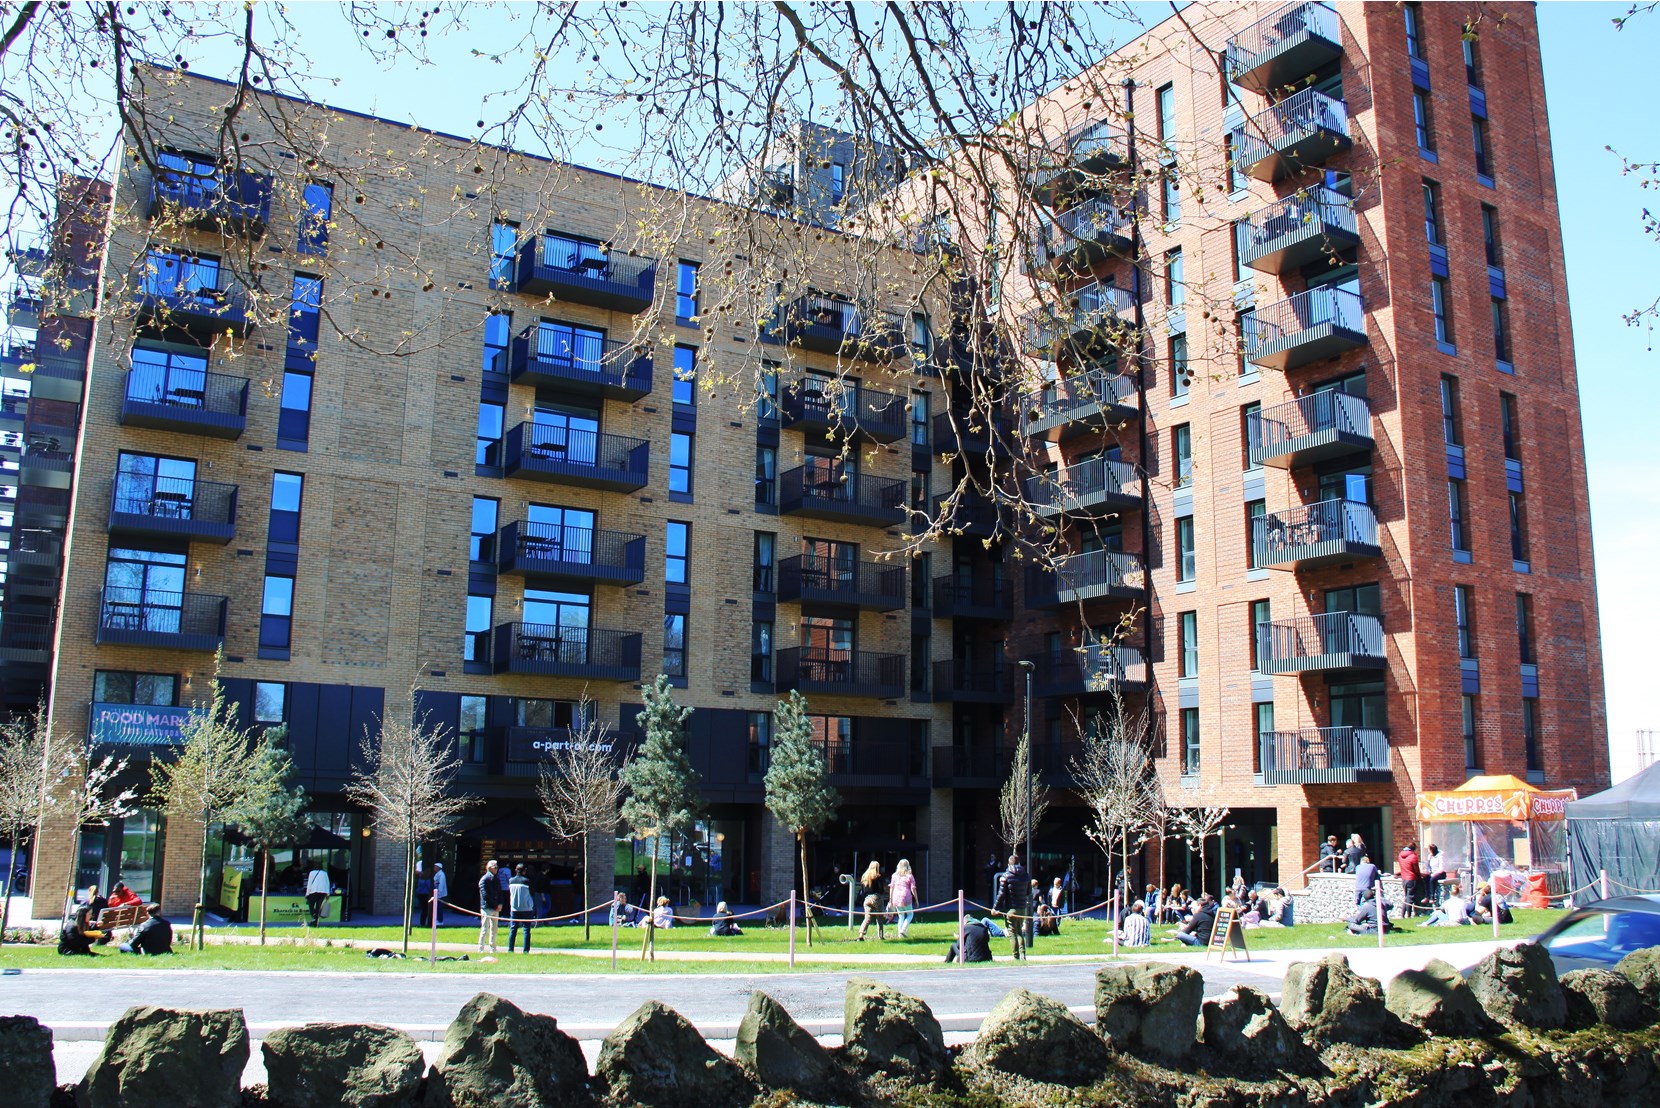 Apartments to Rent by Apo at Apo Barking, Barking, IG11, development panoramic